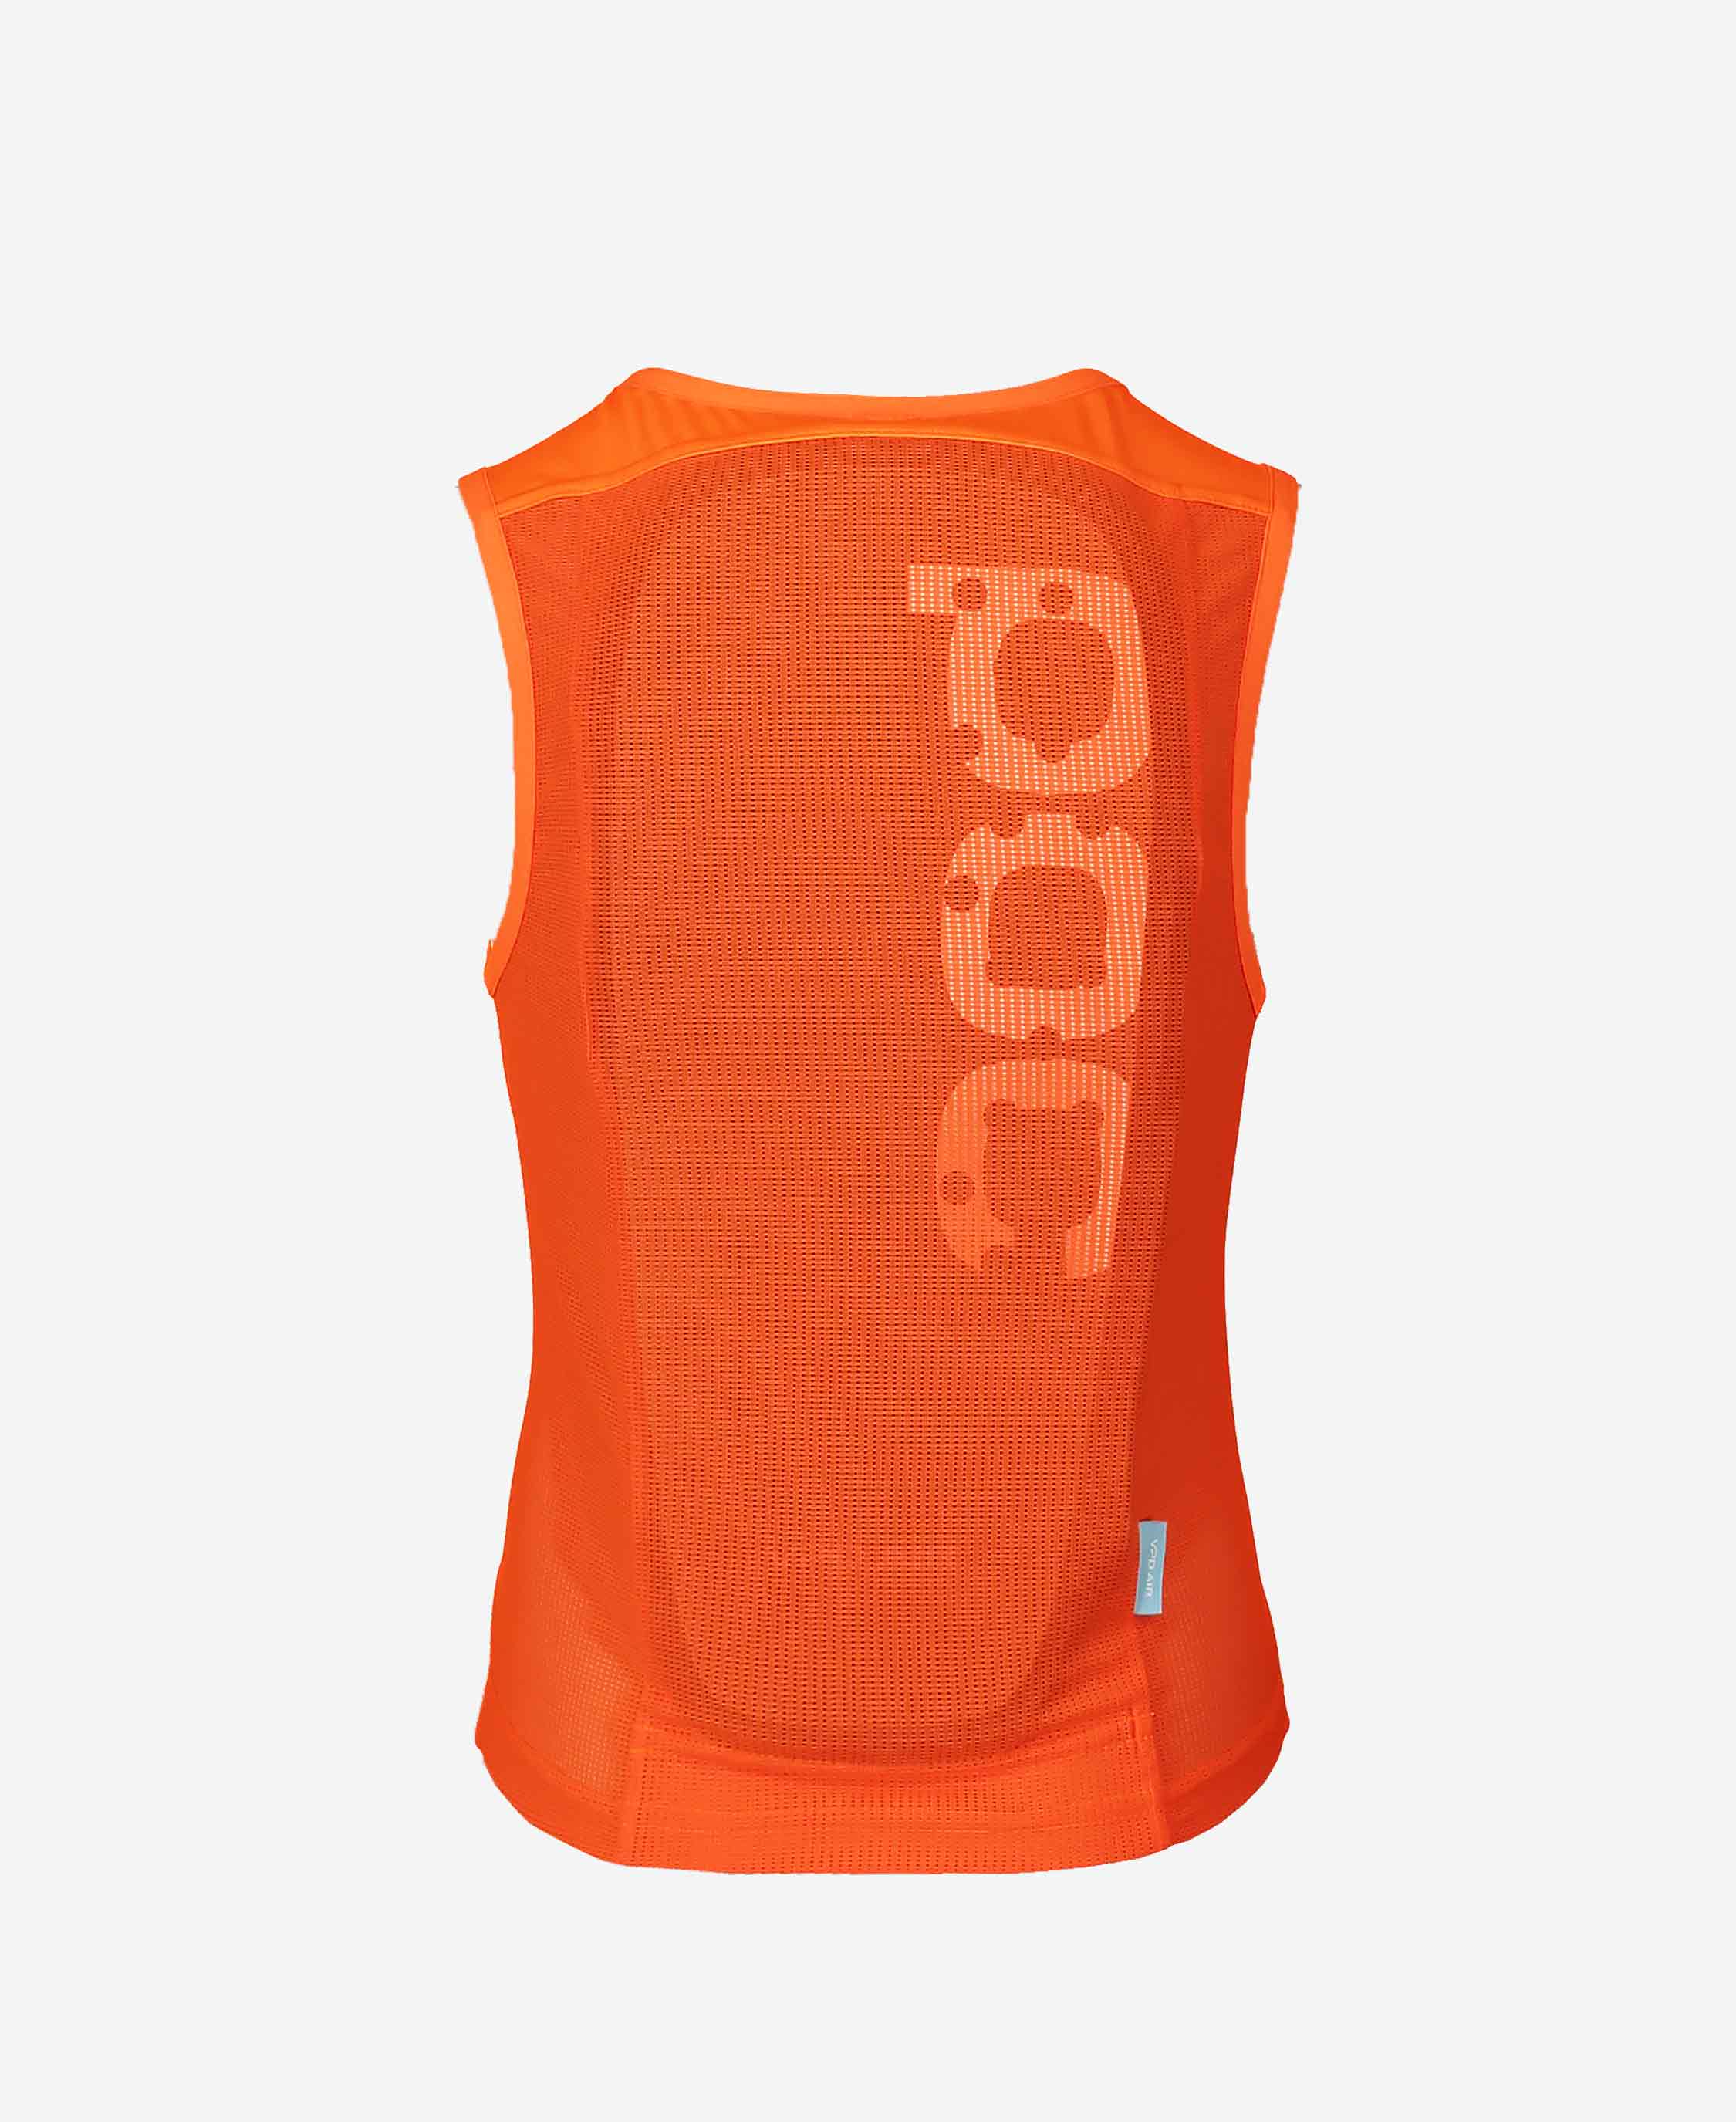 POCito VPD Air Vest - Mountain Kids Outfitters: Fluorescent Orange, Back View